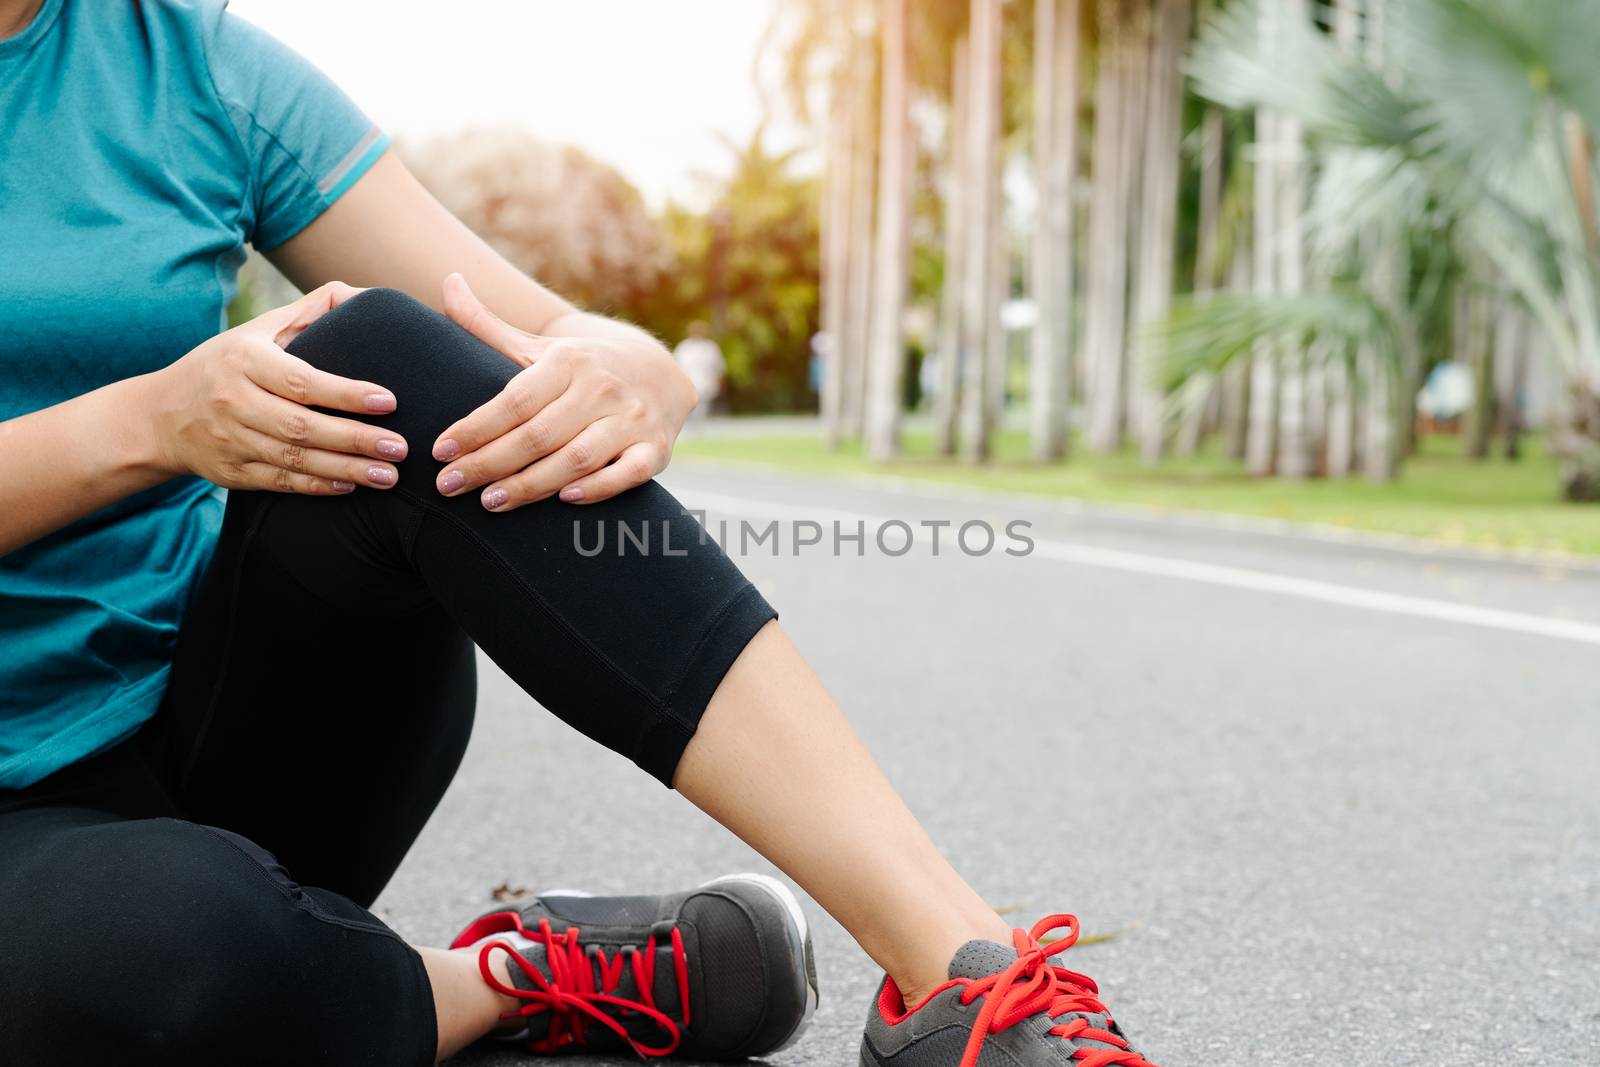 fitness woman runner feel pain on knee. Outdoor exercise activit by psodaz